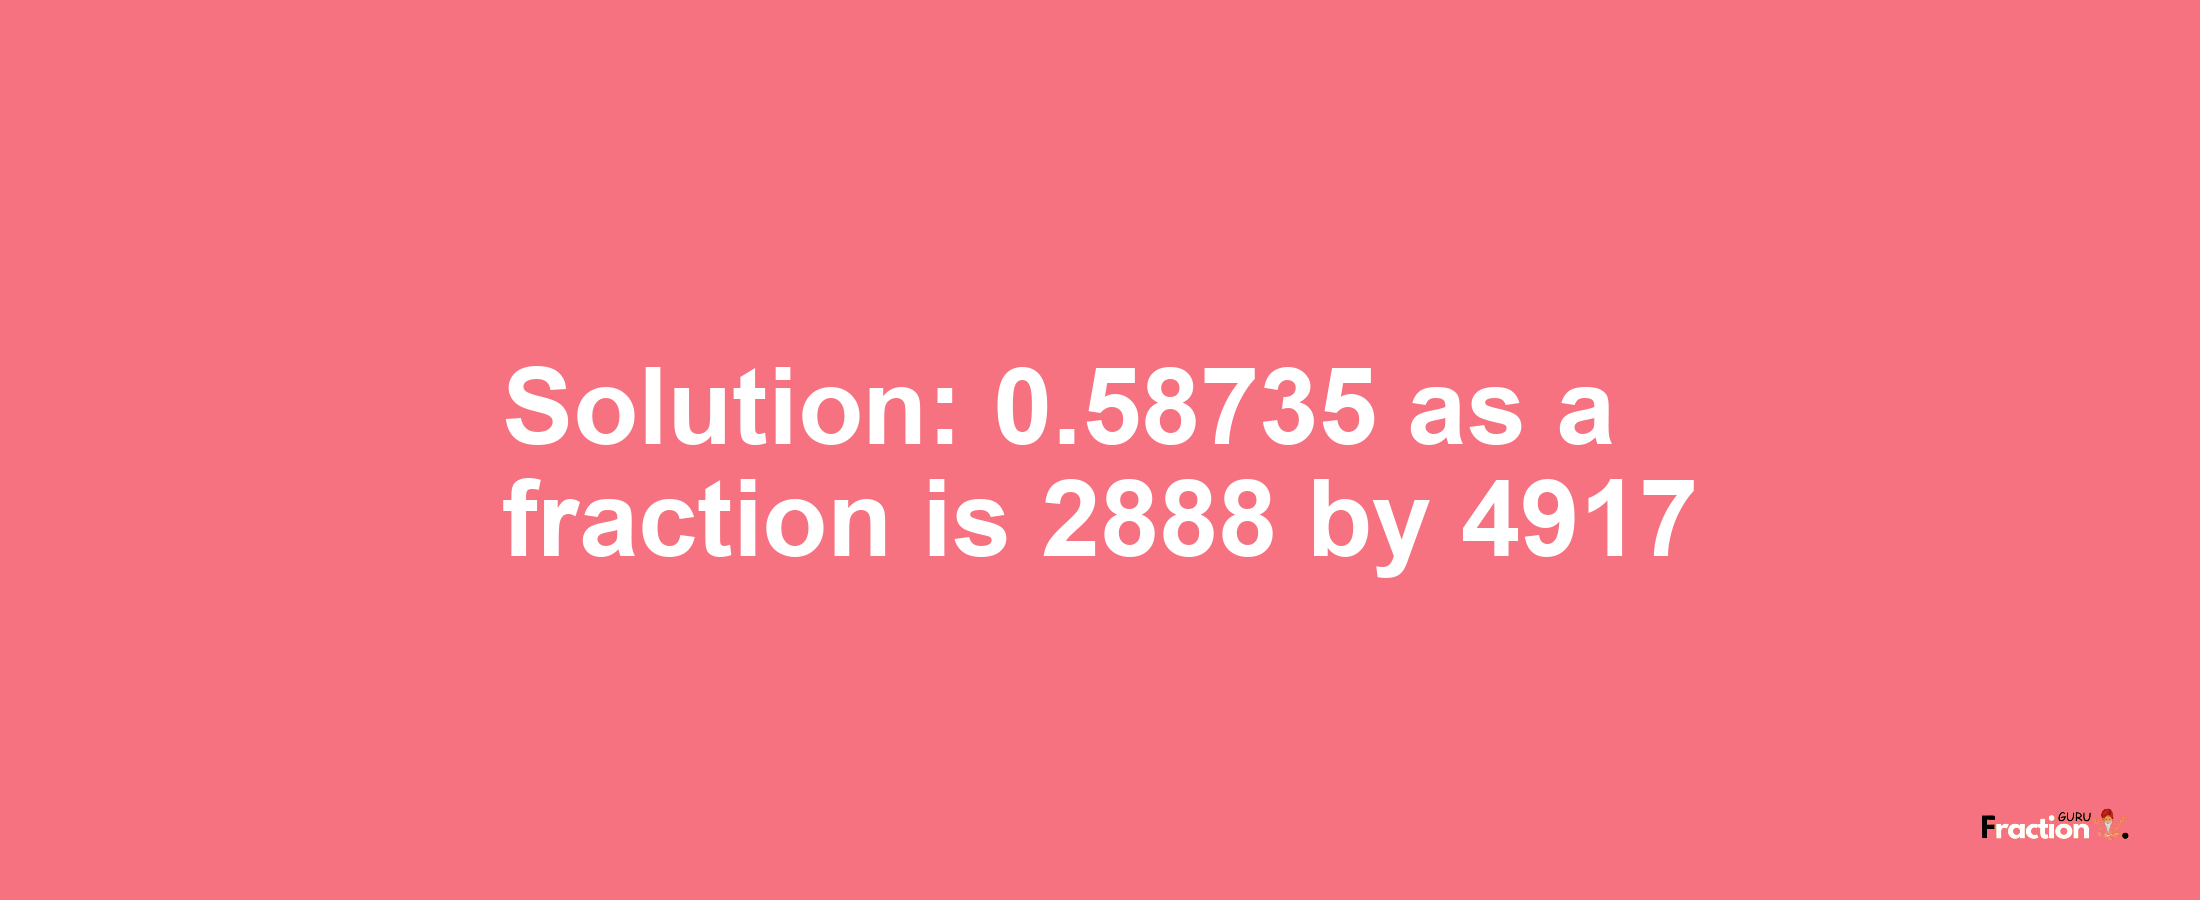 Solution:0.58735 as a fraction is 2888/4917